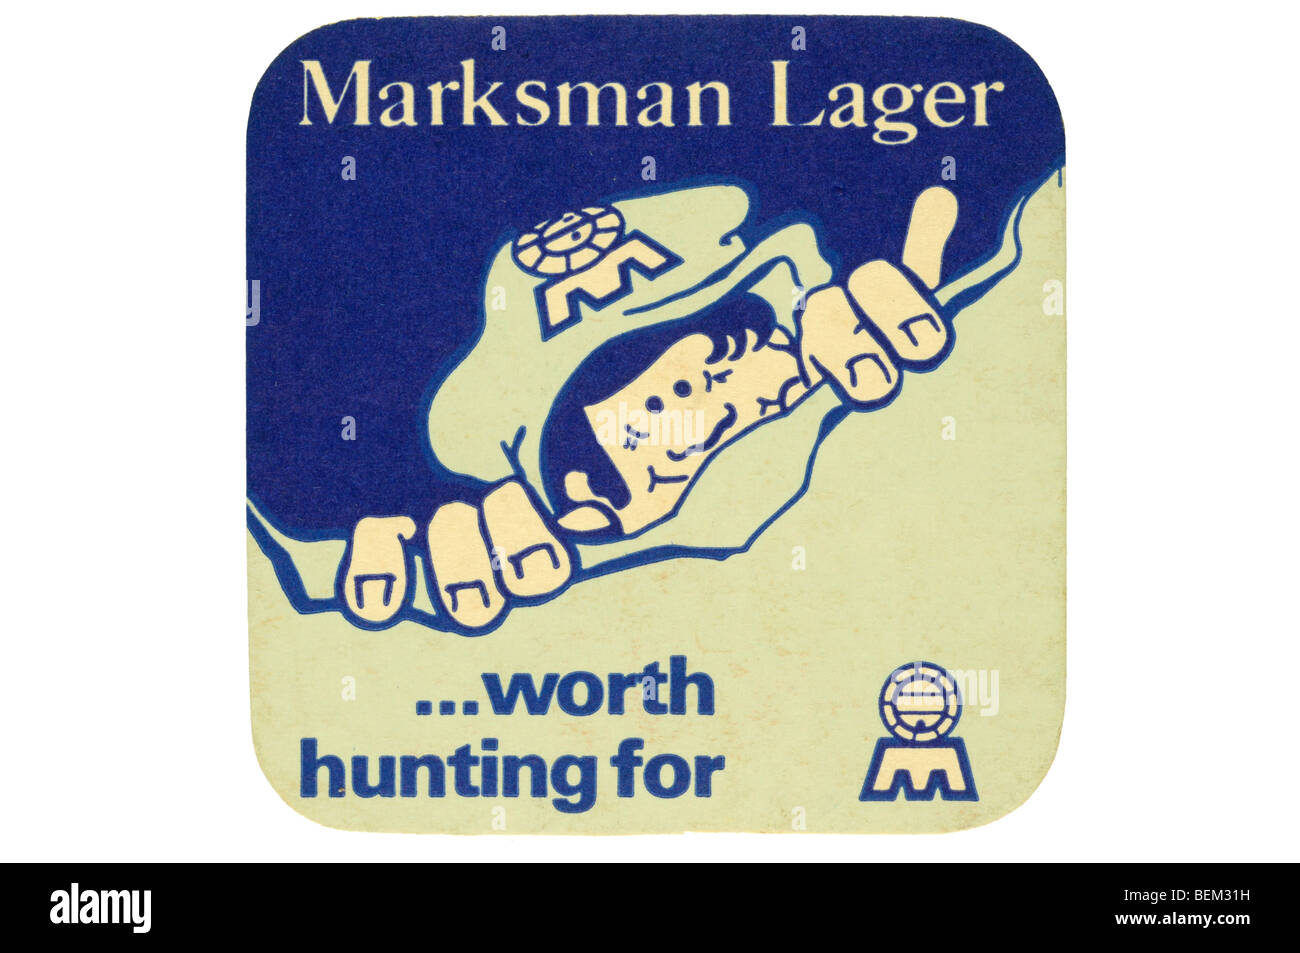 marksman lager worth hunting for Stock Photo